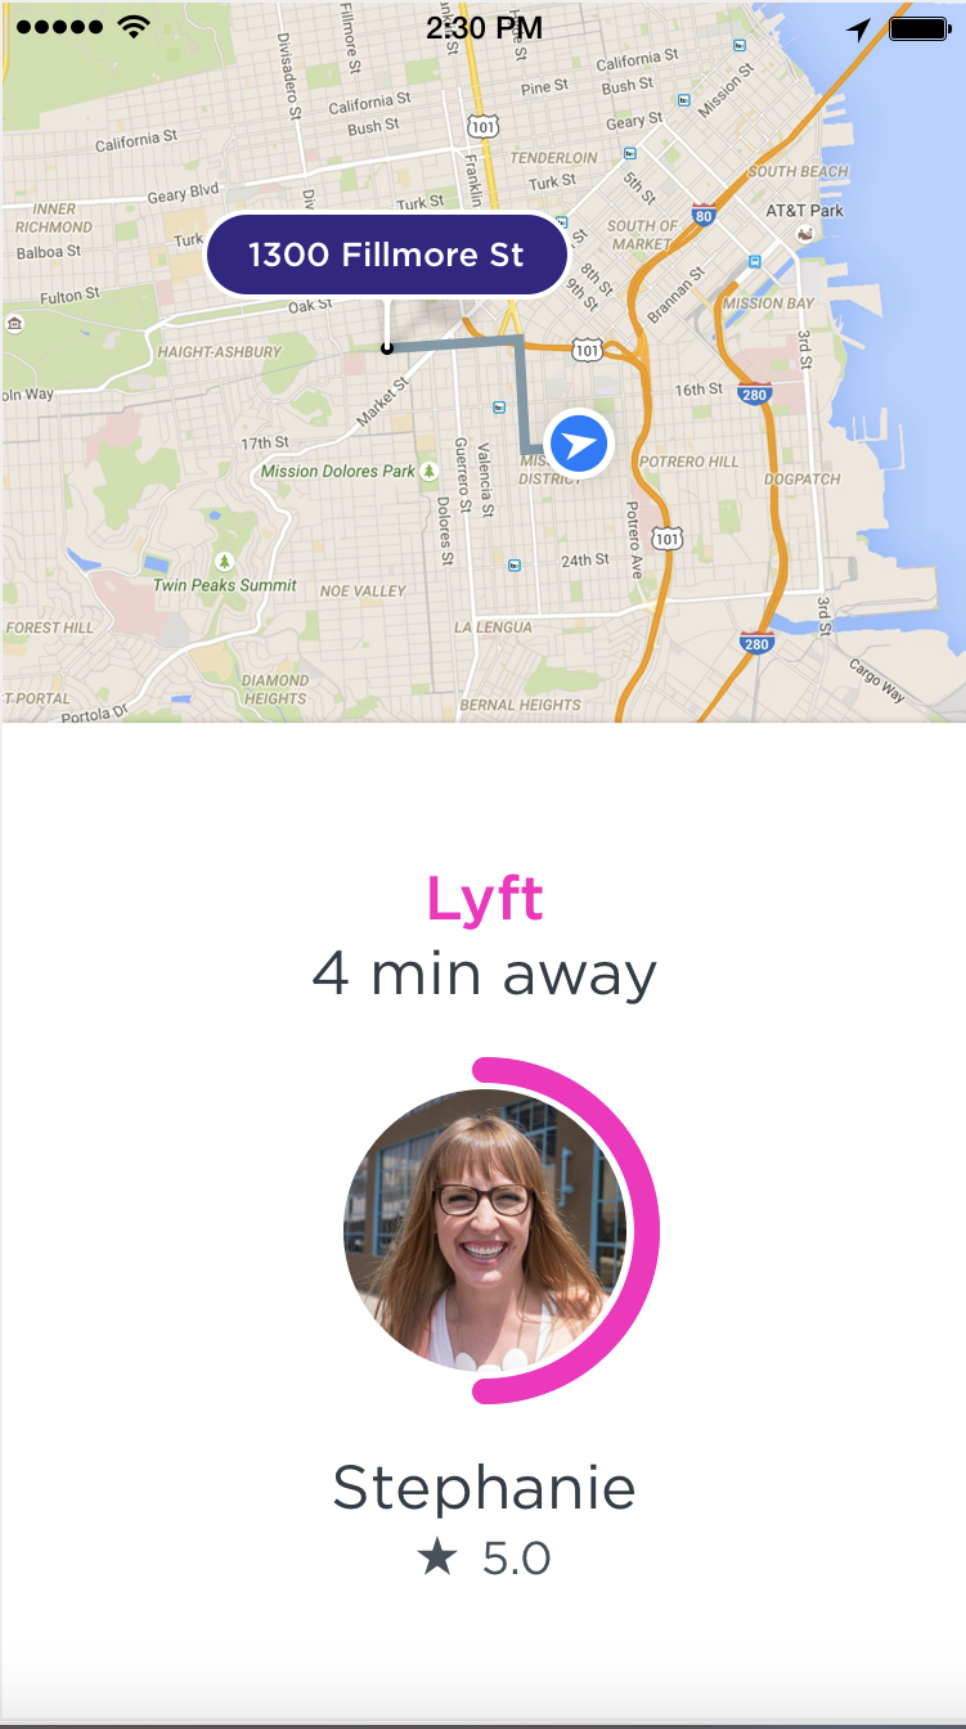 A screenshot from the Lyft app. There’s a map, a photo of the driver, and a message that says she’s 4 minutes away. The driver’s 5-star rating is also displayed.